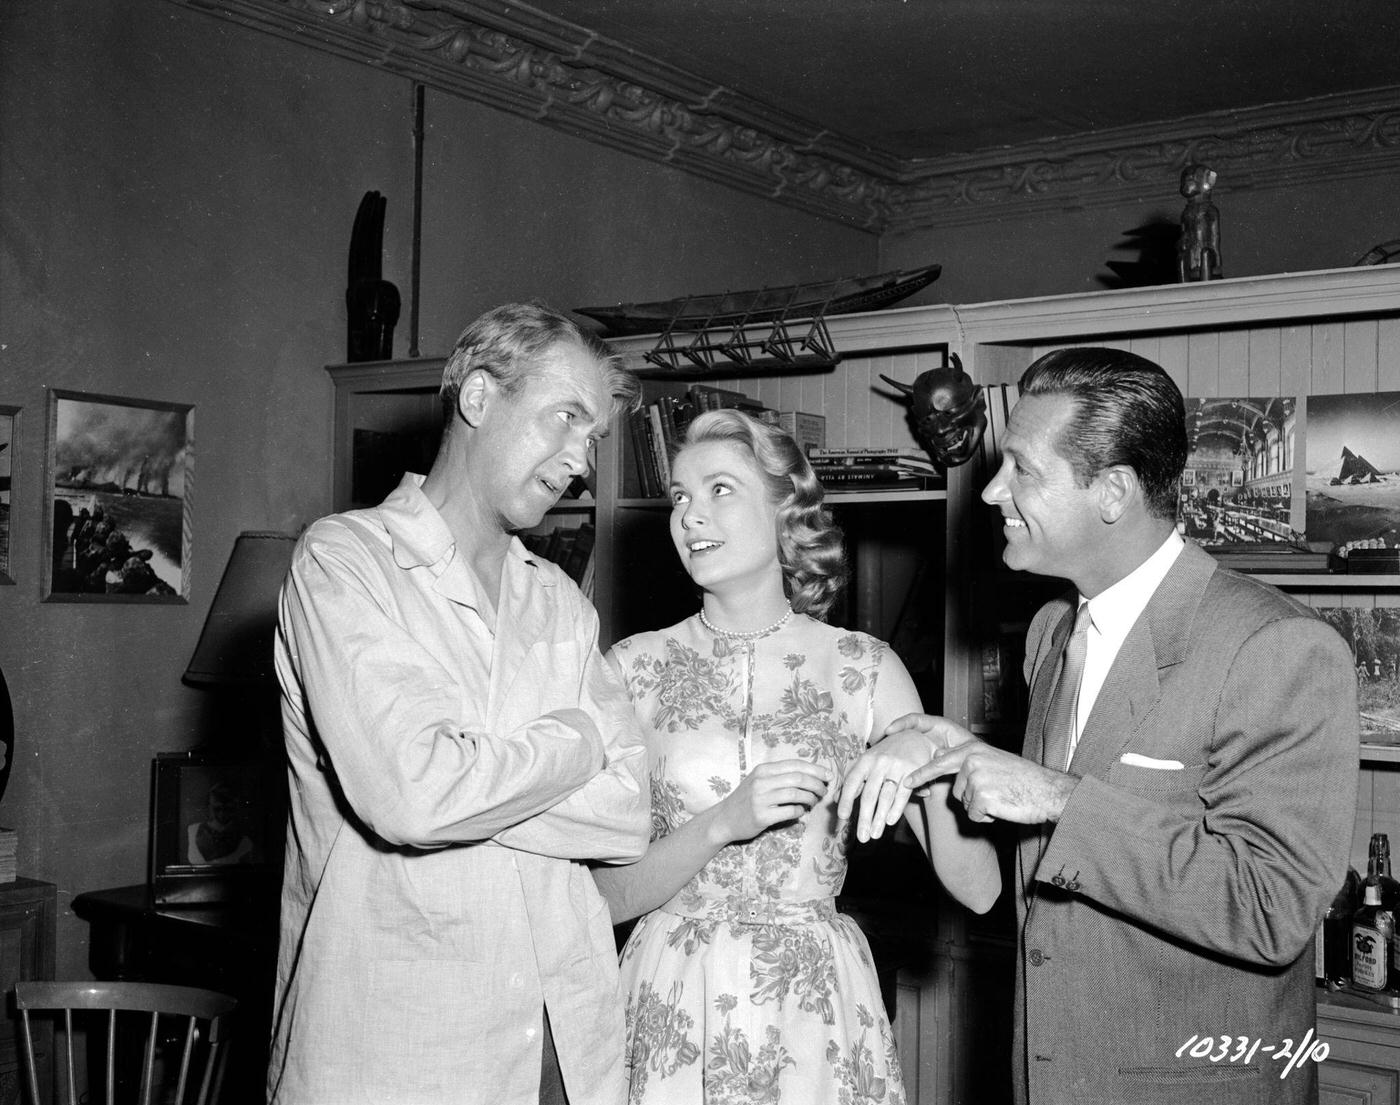 William Holden points out Grace Kelly's engagement ring to James Stewart in a moment of fun on the set of Hitchcock's 'Rear Window'.